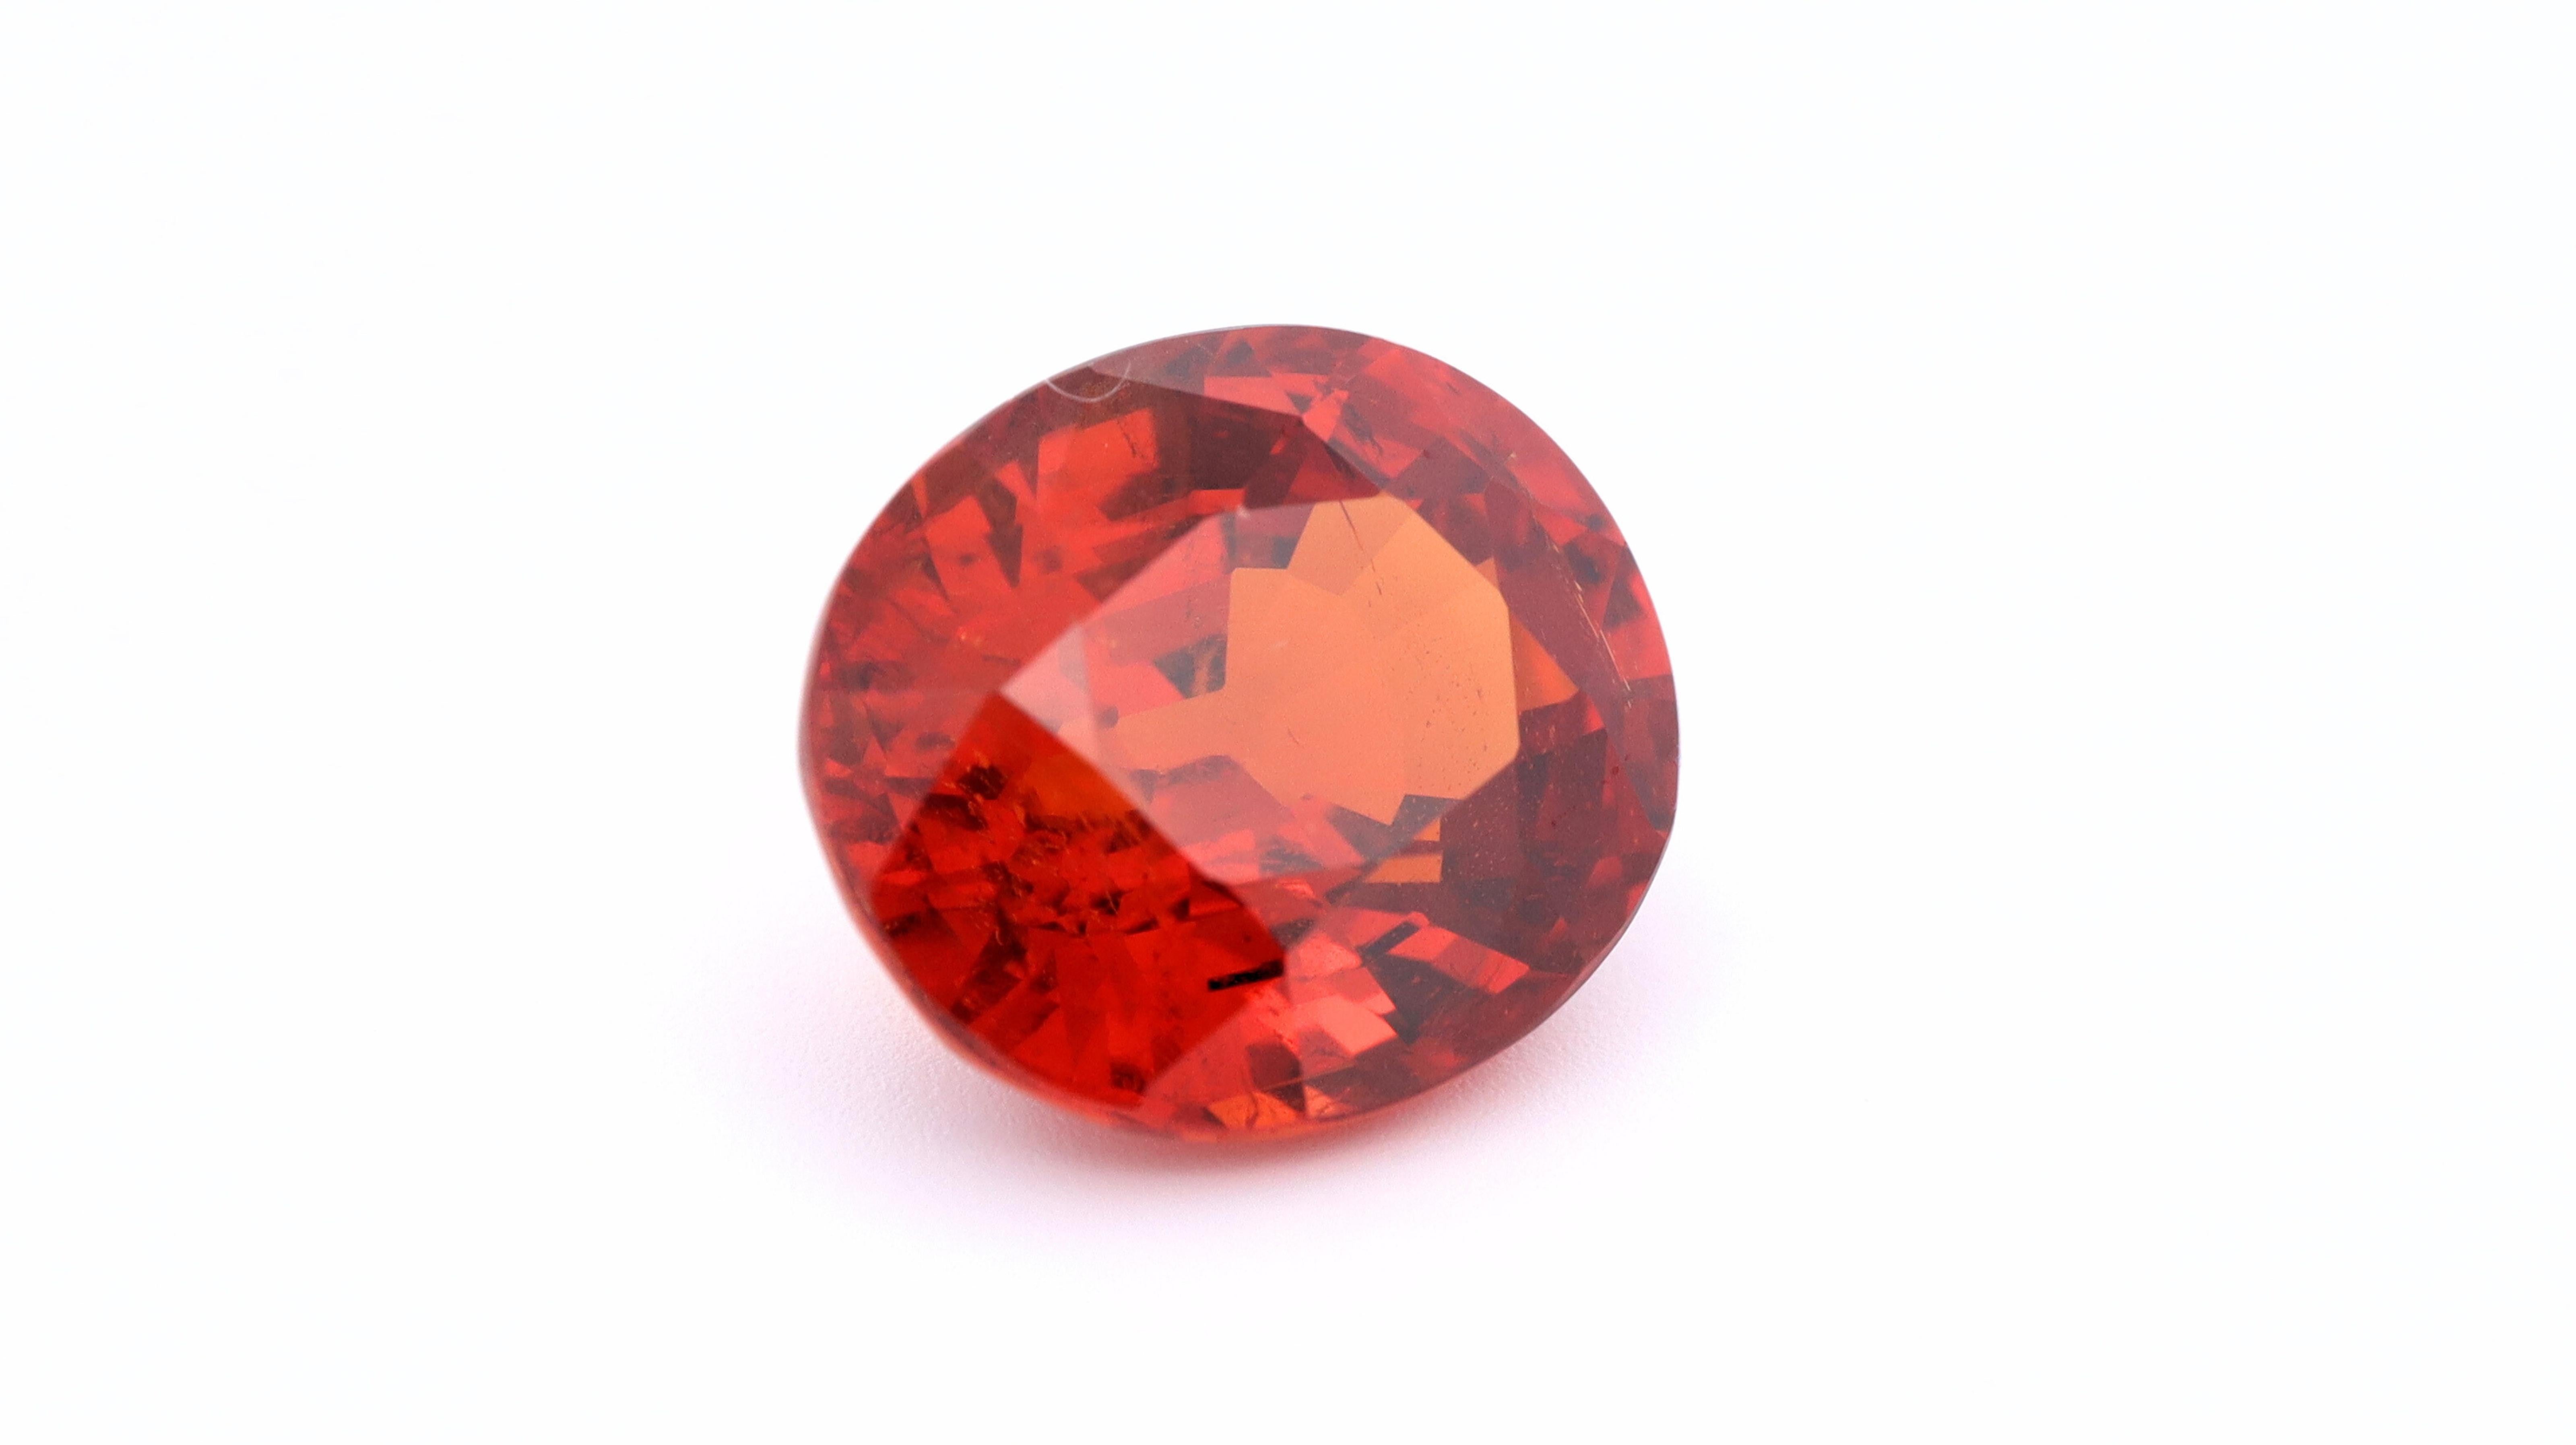 A natural certified Spessartine Garnet also known as Mandarin Garnet.

There are two well known varieties of orange garnets, Hessonite, which tends to be readily available and less hard, and Spessartine garnet, as this stone, which is rare and